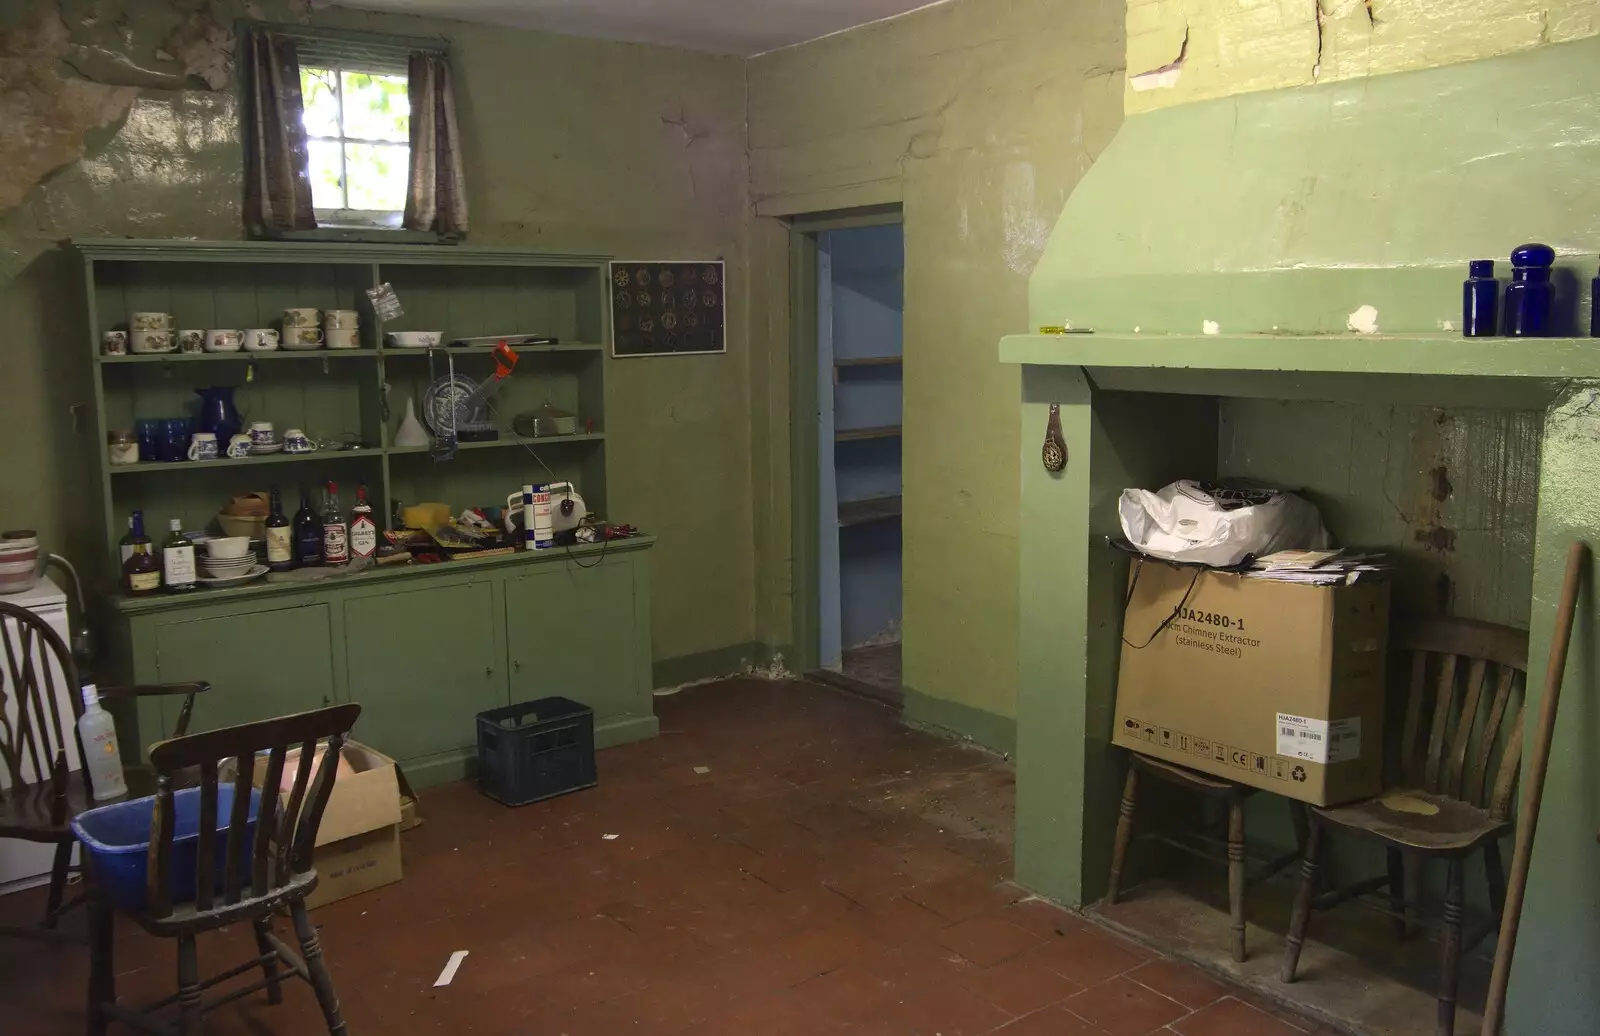 The kitchen - untouched for decades, from A 1940s Timewarp, Site 4, Bungay Airfield, Flixton, Suffolk - 9th June 2022